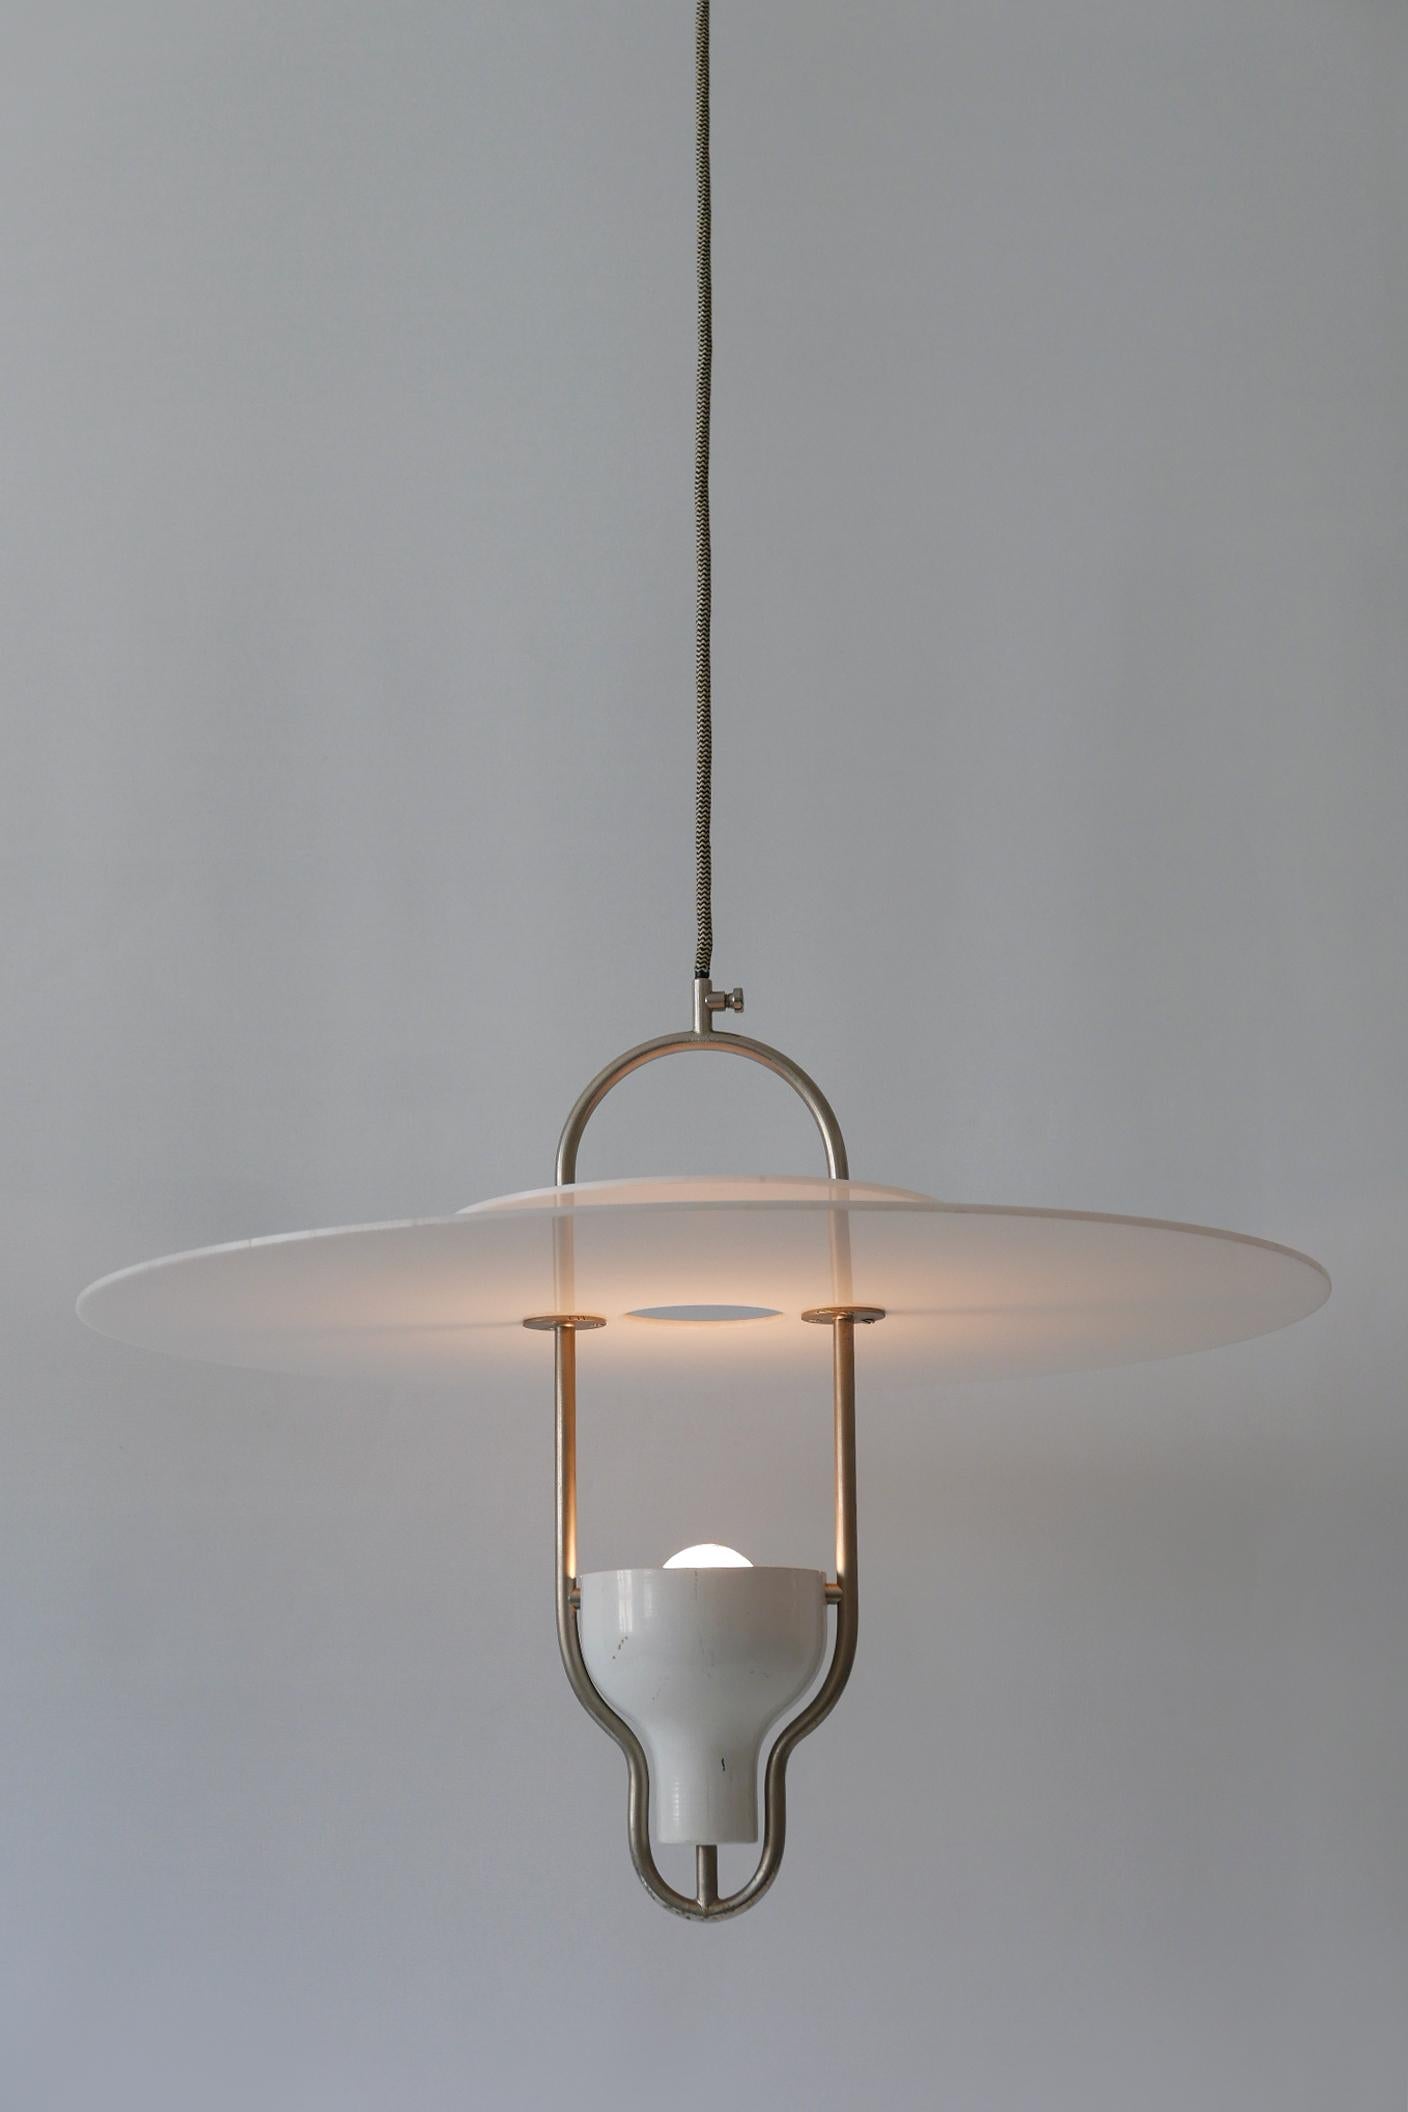 Exceptional Mid-Century Modern Ufo Pendant Lamp, Italy, 1960s For Sale 2